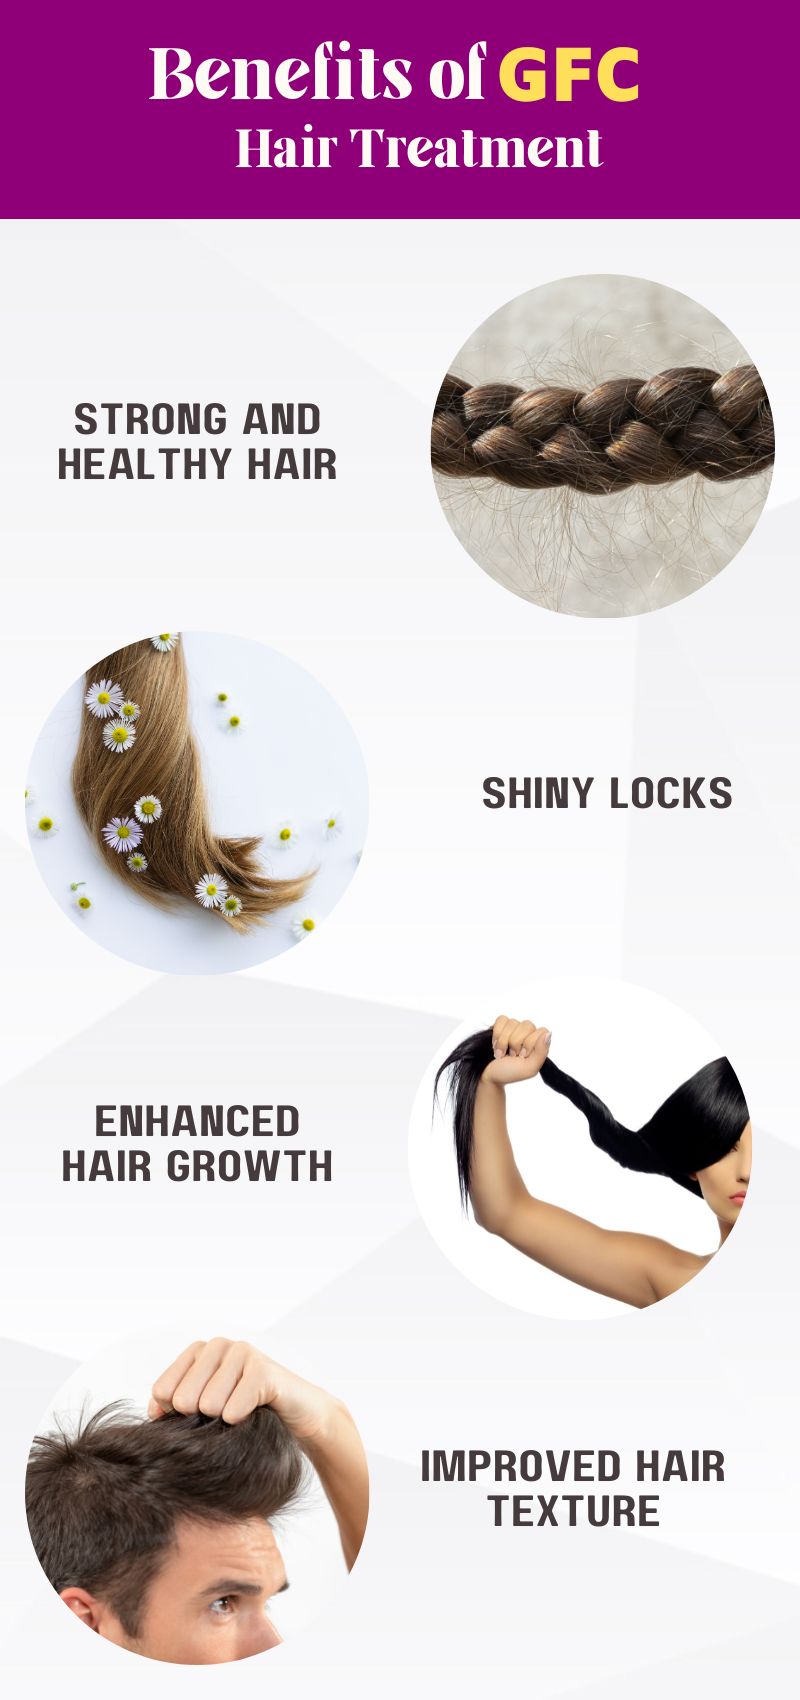 benefits of GFC hair treatment